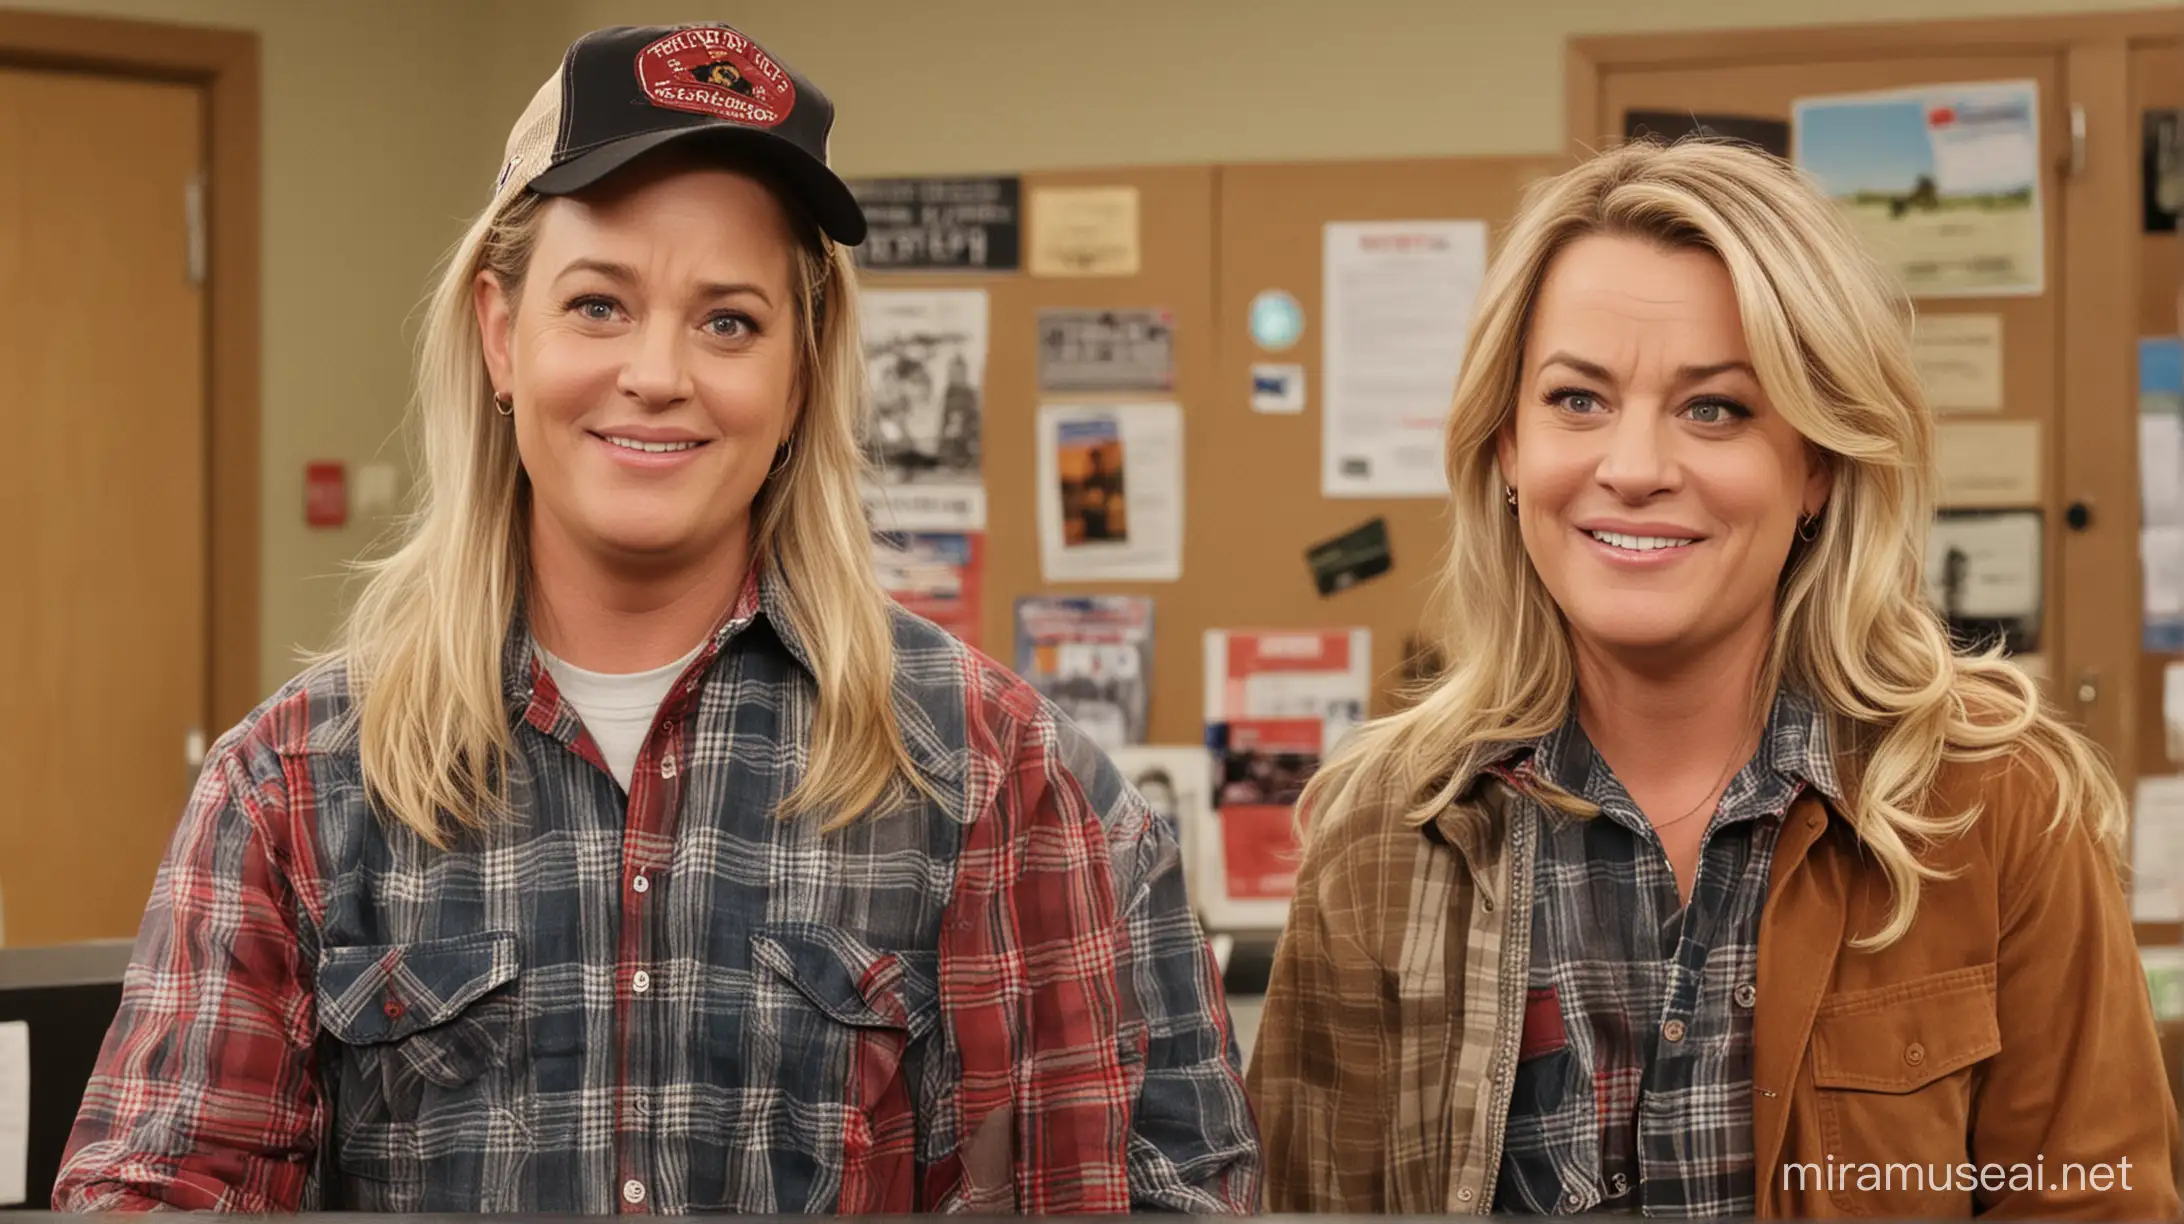 Tom Hanks as an original new character on the television show Parks and Recreation. He is in a scene with Amy poehler as Leslie Knope,  Ron Swanson. Other  characters from the show too.  The scene takes place at the office where the people work. Hanks is wearing a trucker ball cap and flannel shirt. 